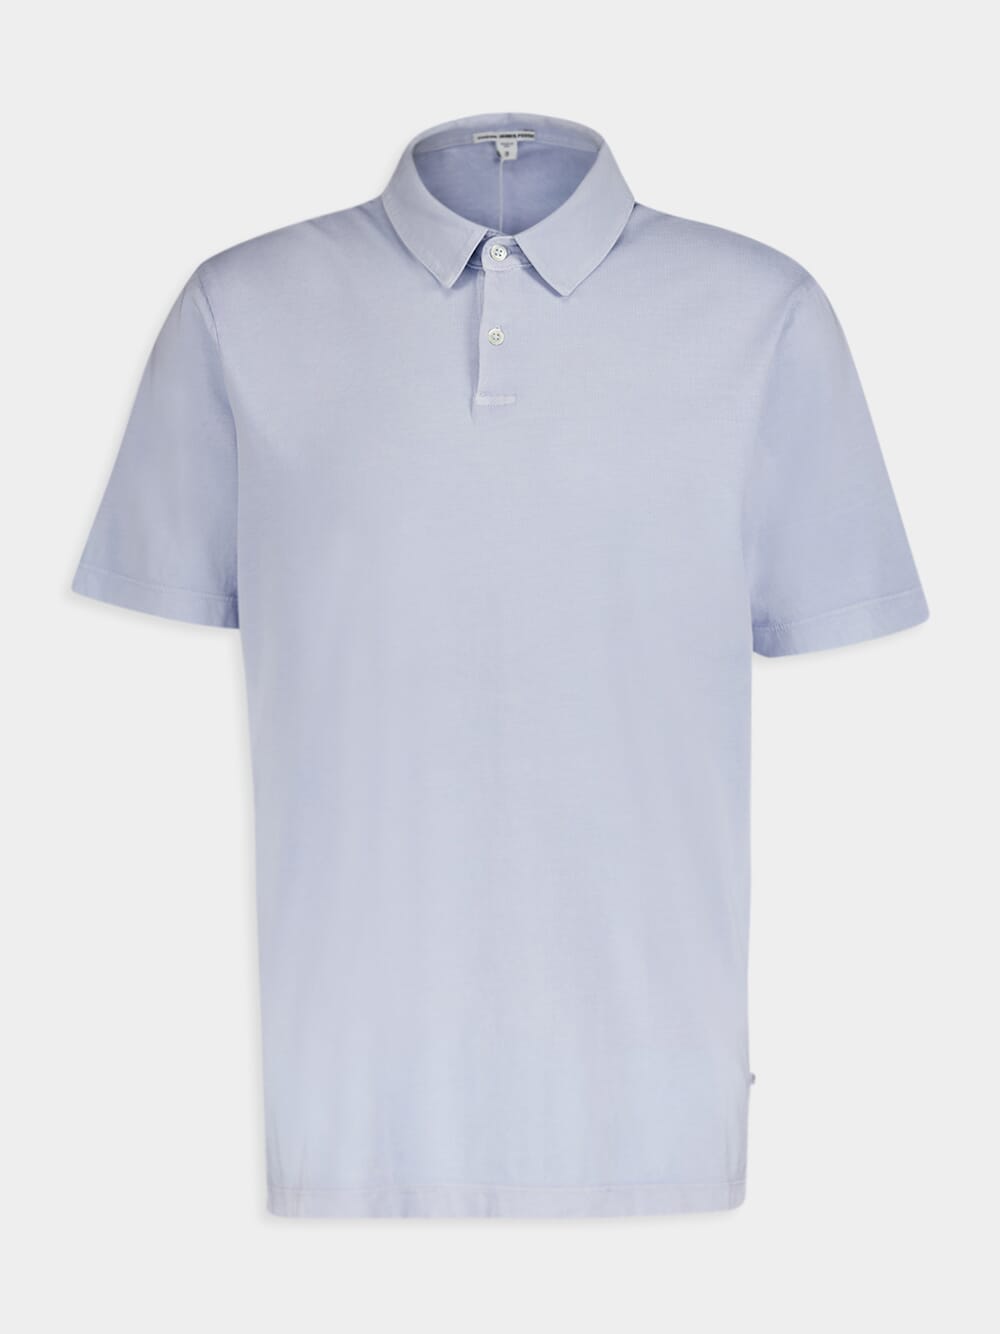 James PerseShort-Sleeved Classic Blue Polo Shirt at Fashion Clinic